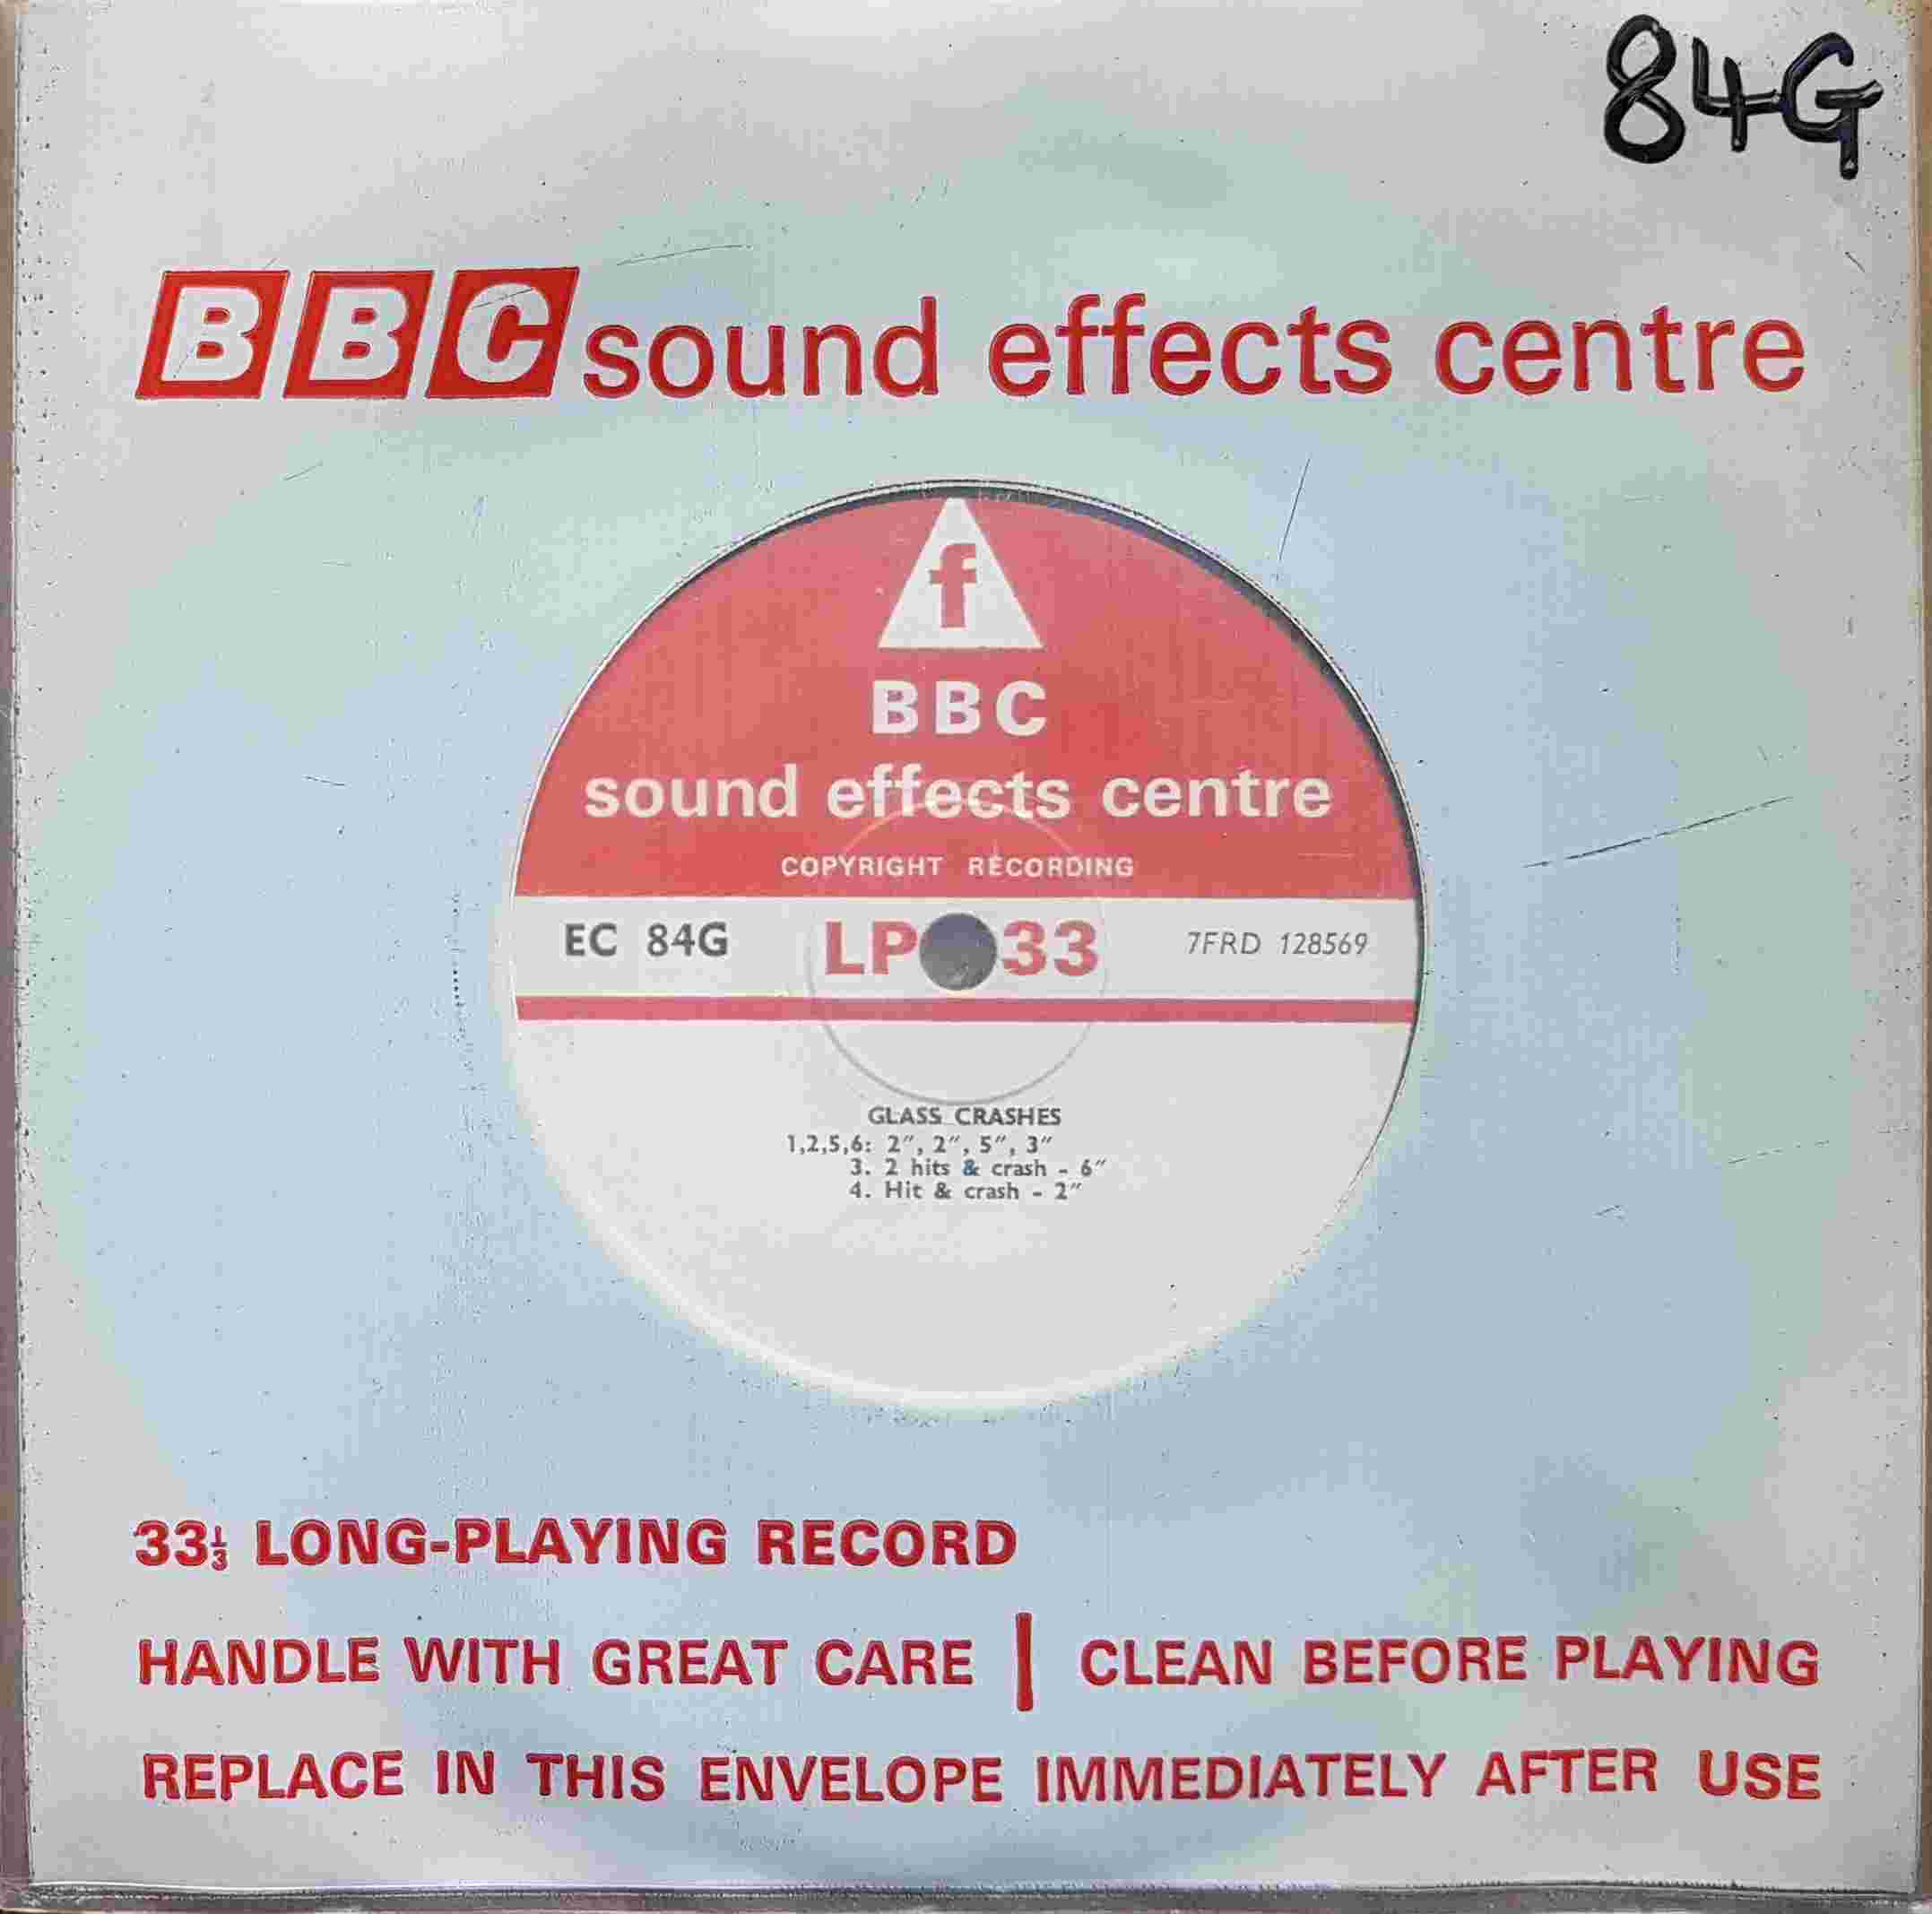 Picture of EC 84G Glass crashes by artist Not registered from the BBC singles - Records and Tapes library